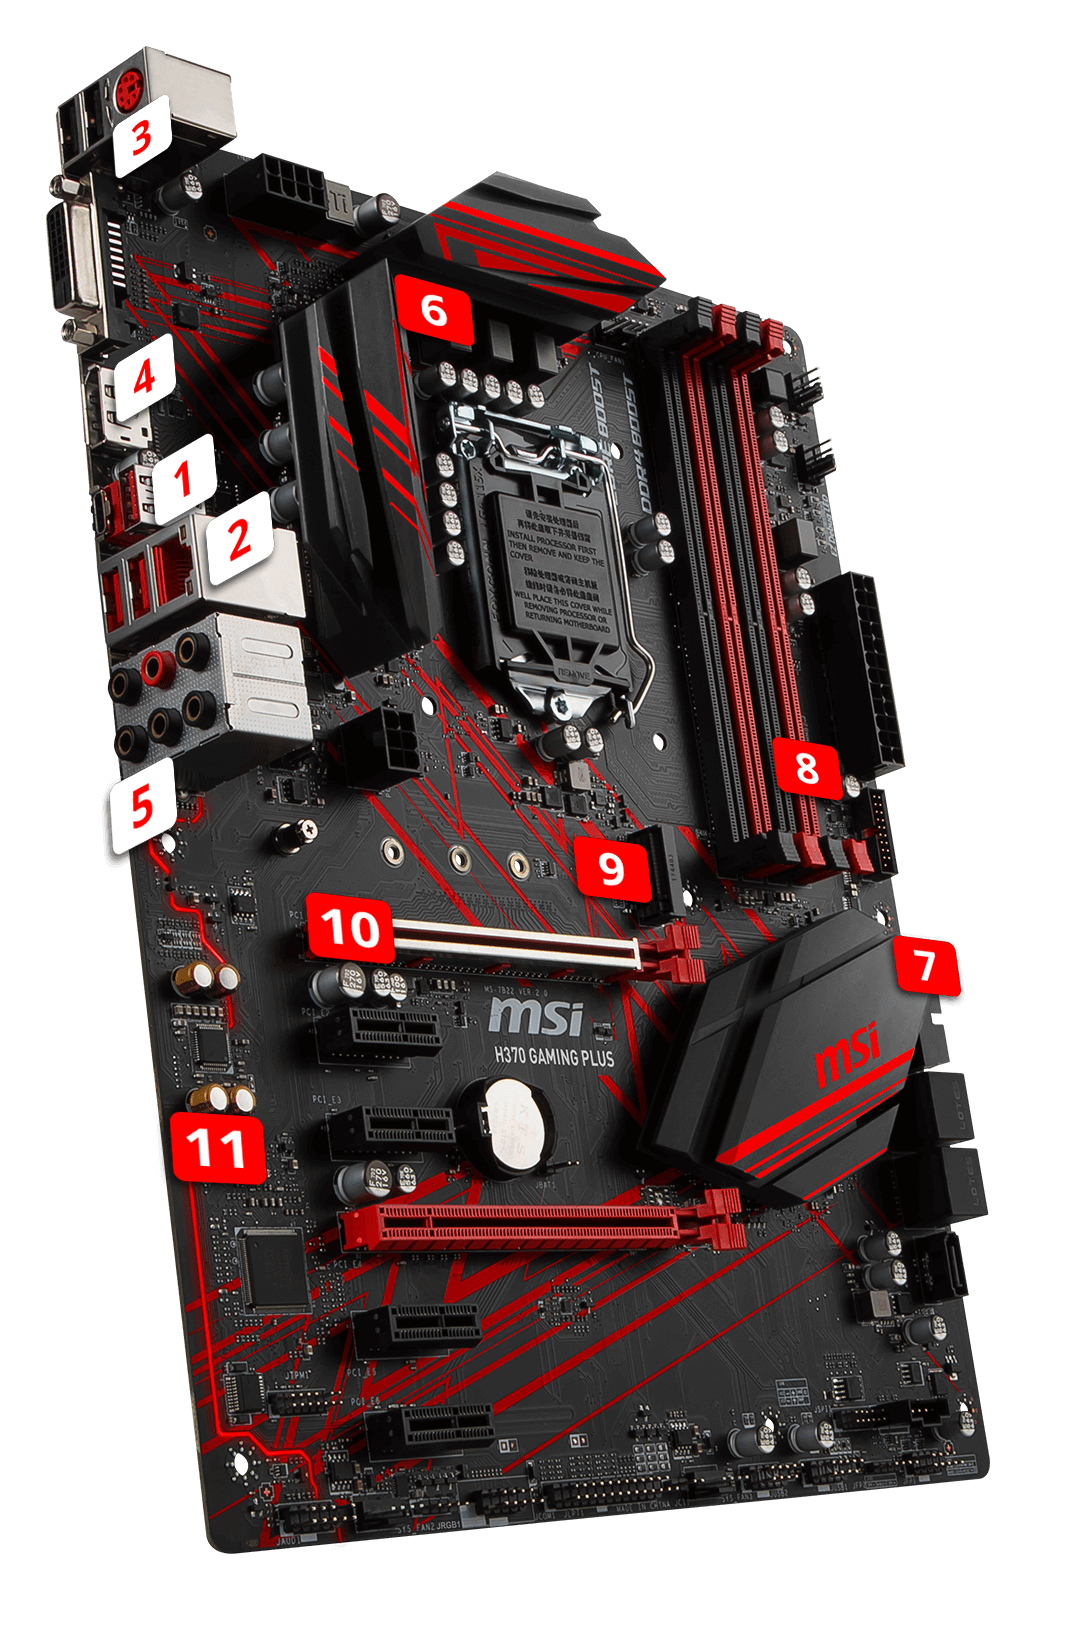 MSI H370 GAMING PLUS overview